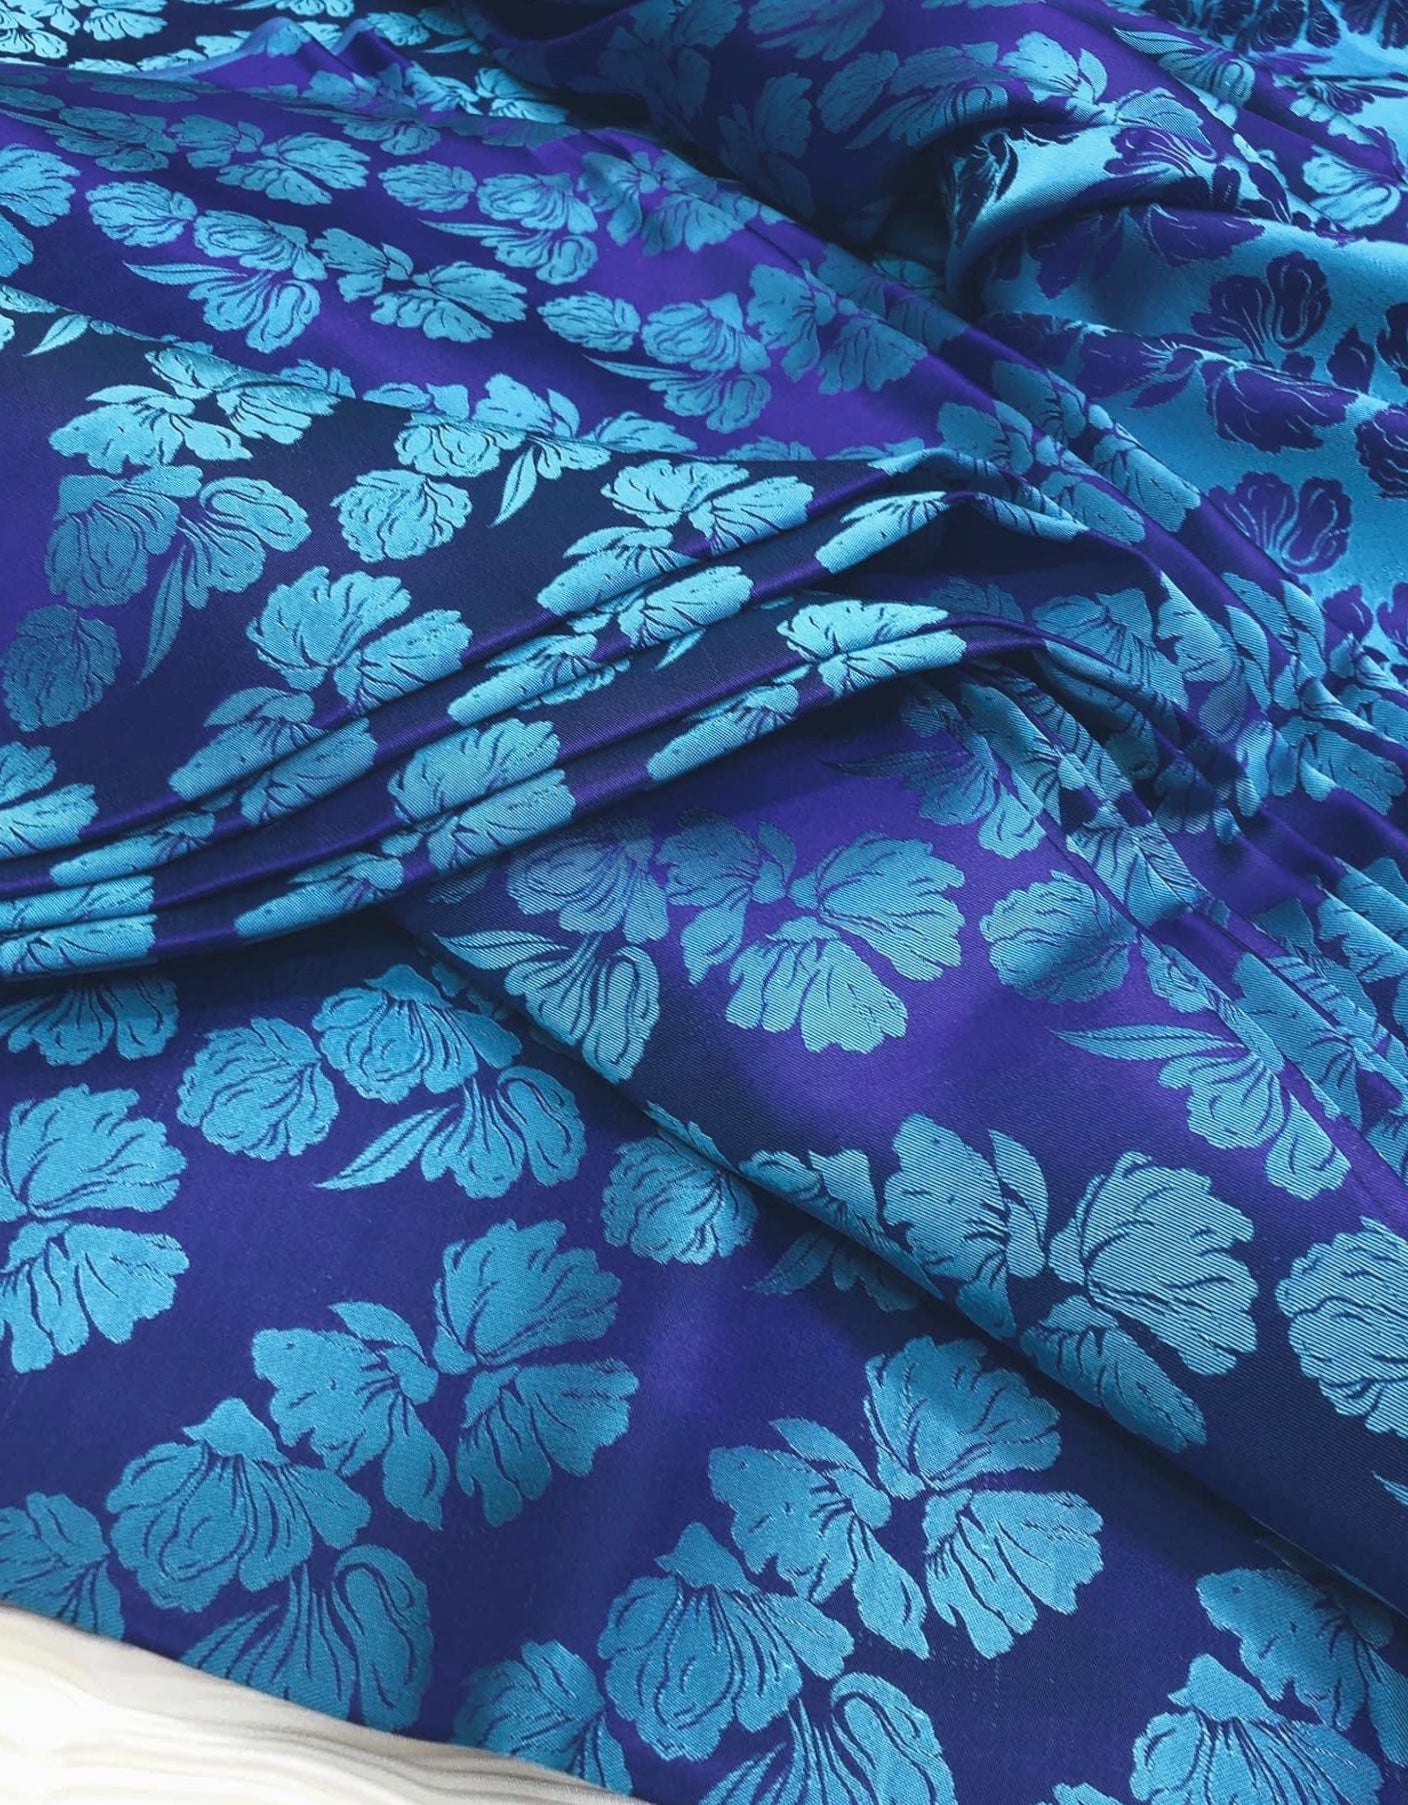 Blue silk with Flowers - PURE MULBERRY SILK fabric by the yard